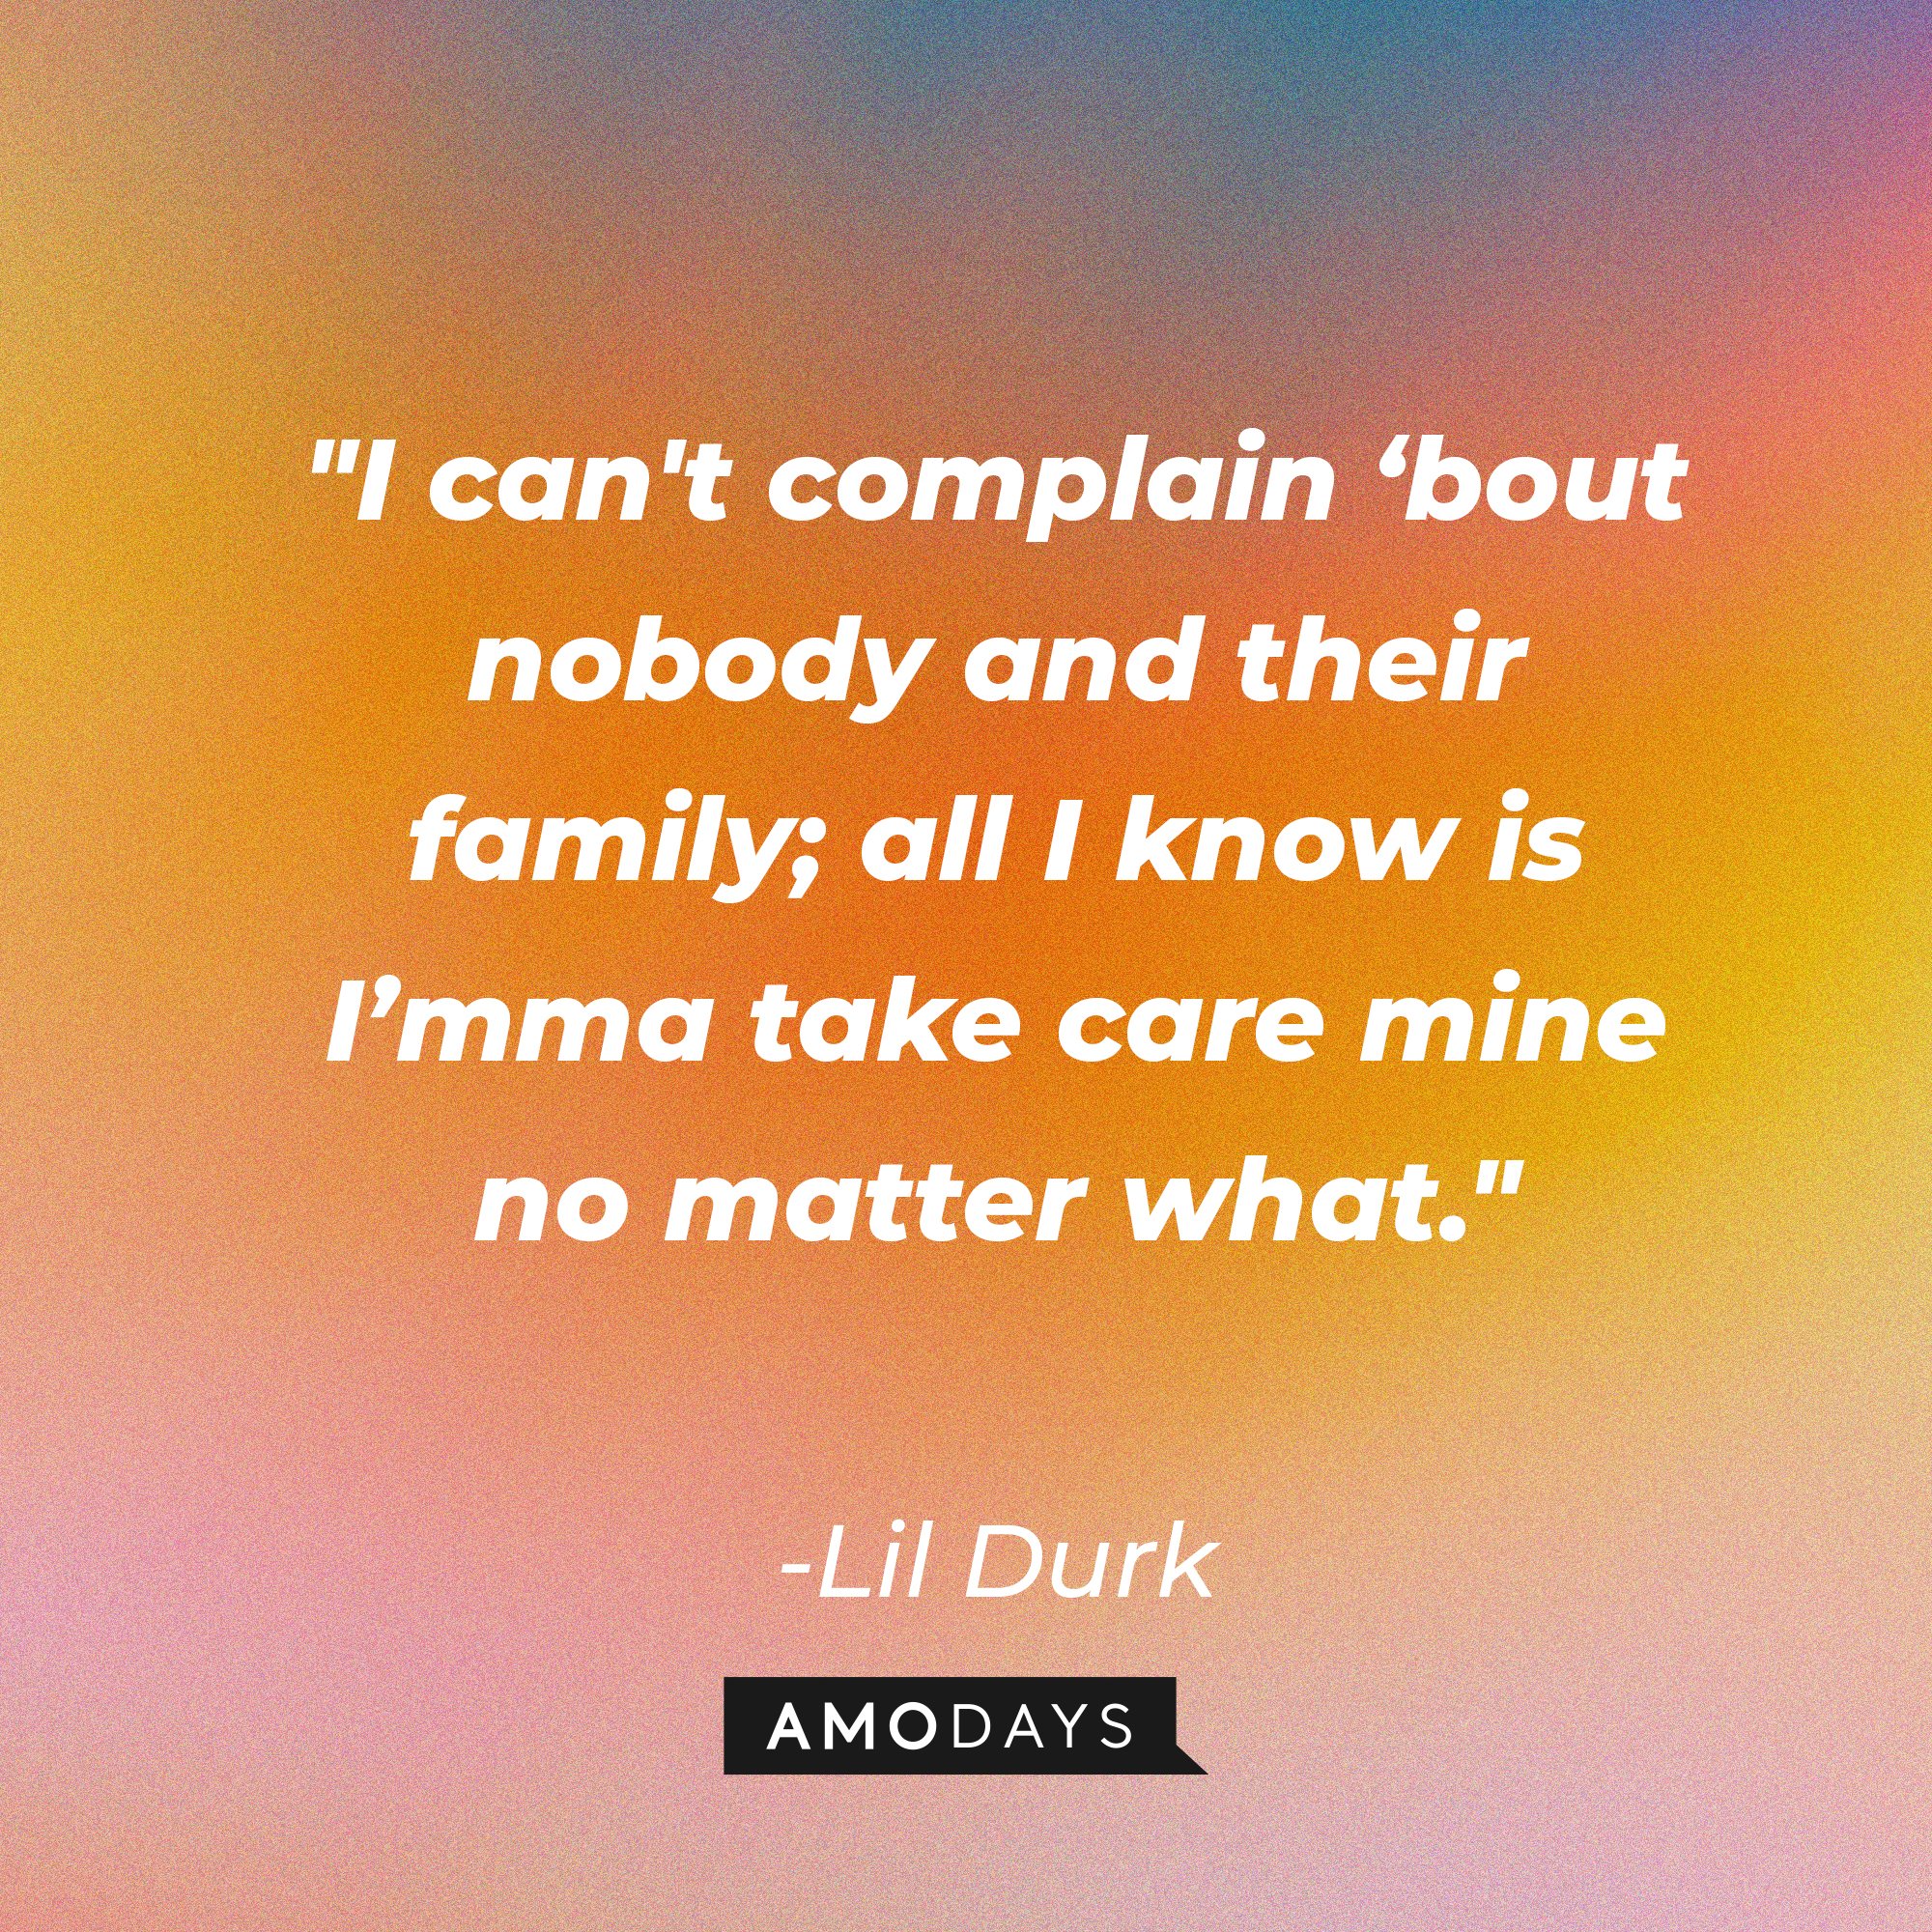 Lil Durk’s quote: "I think my problem is that I argue with people no matter of their age.” | Image: AmoDays 